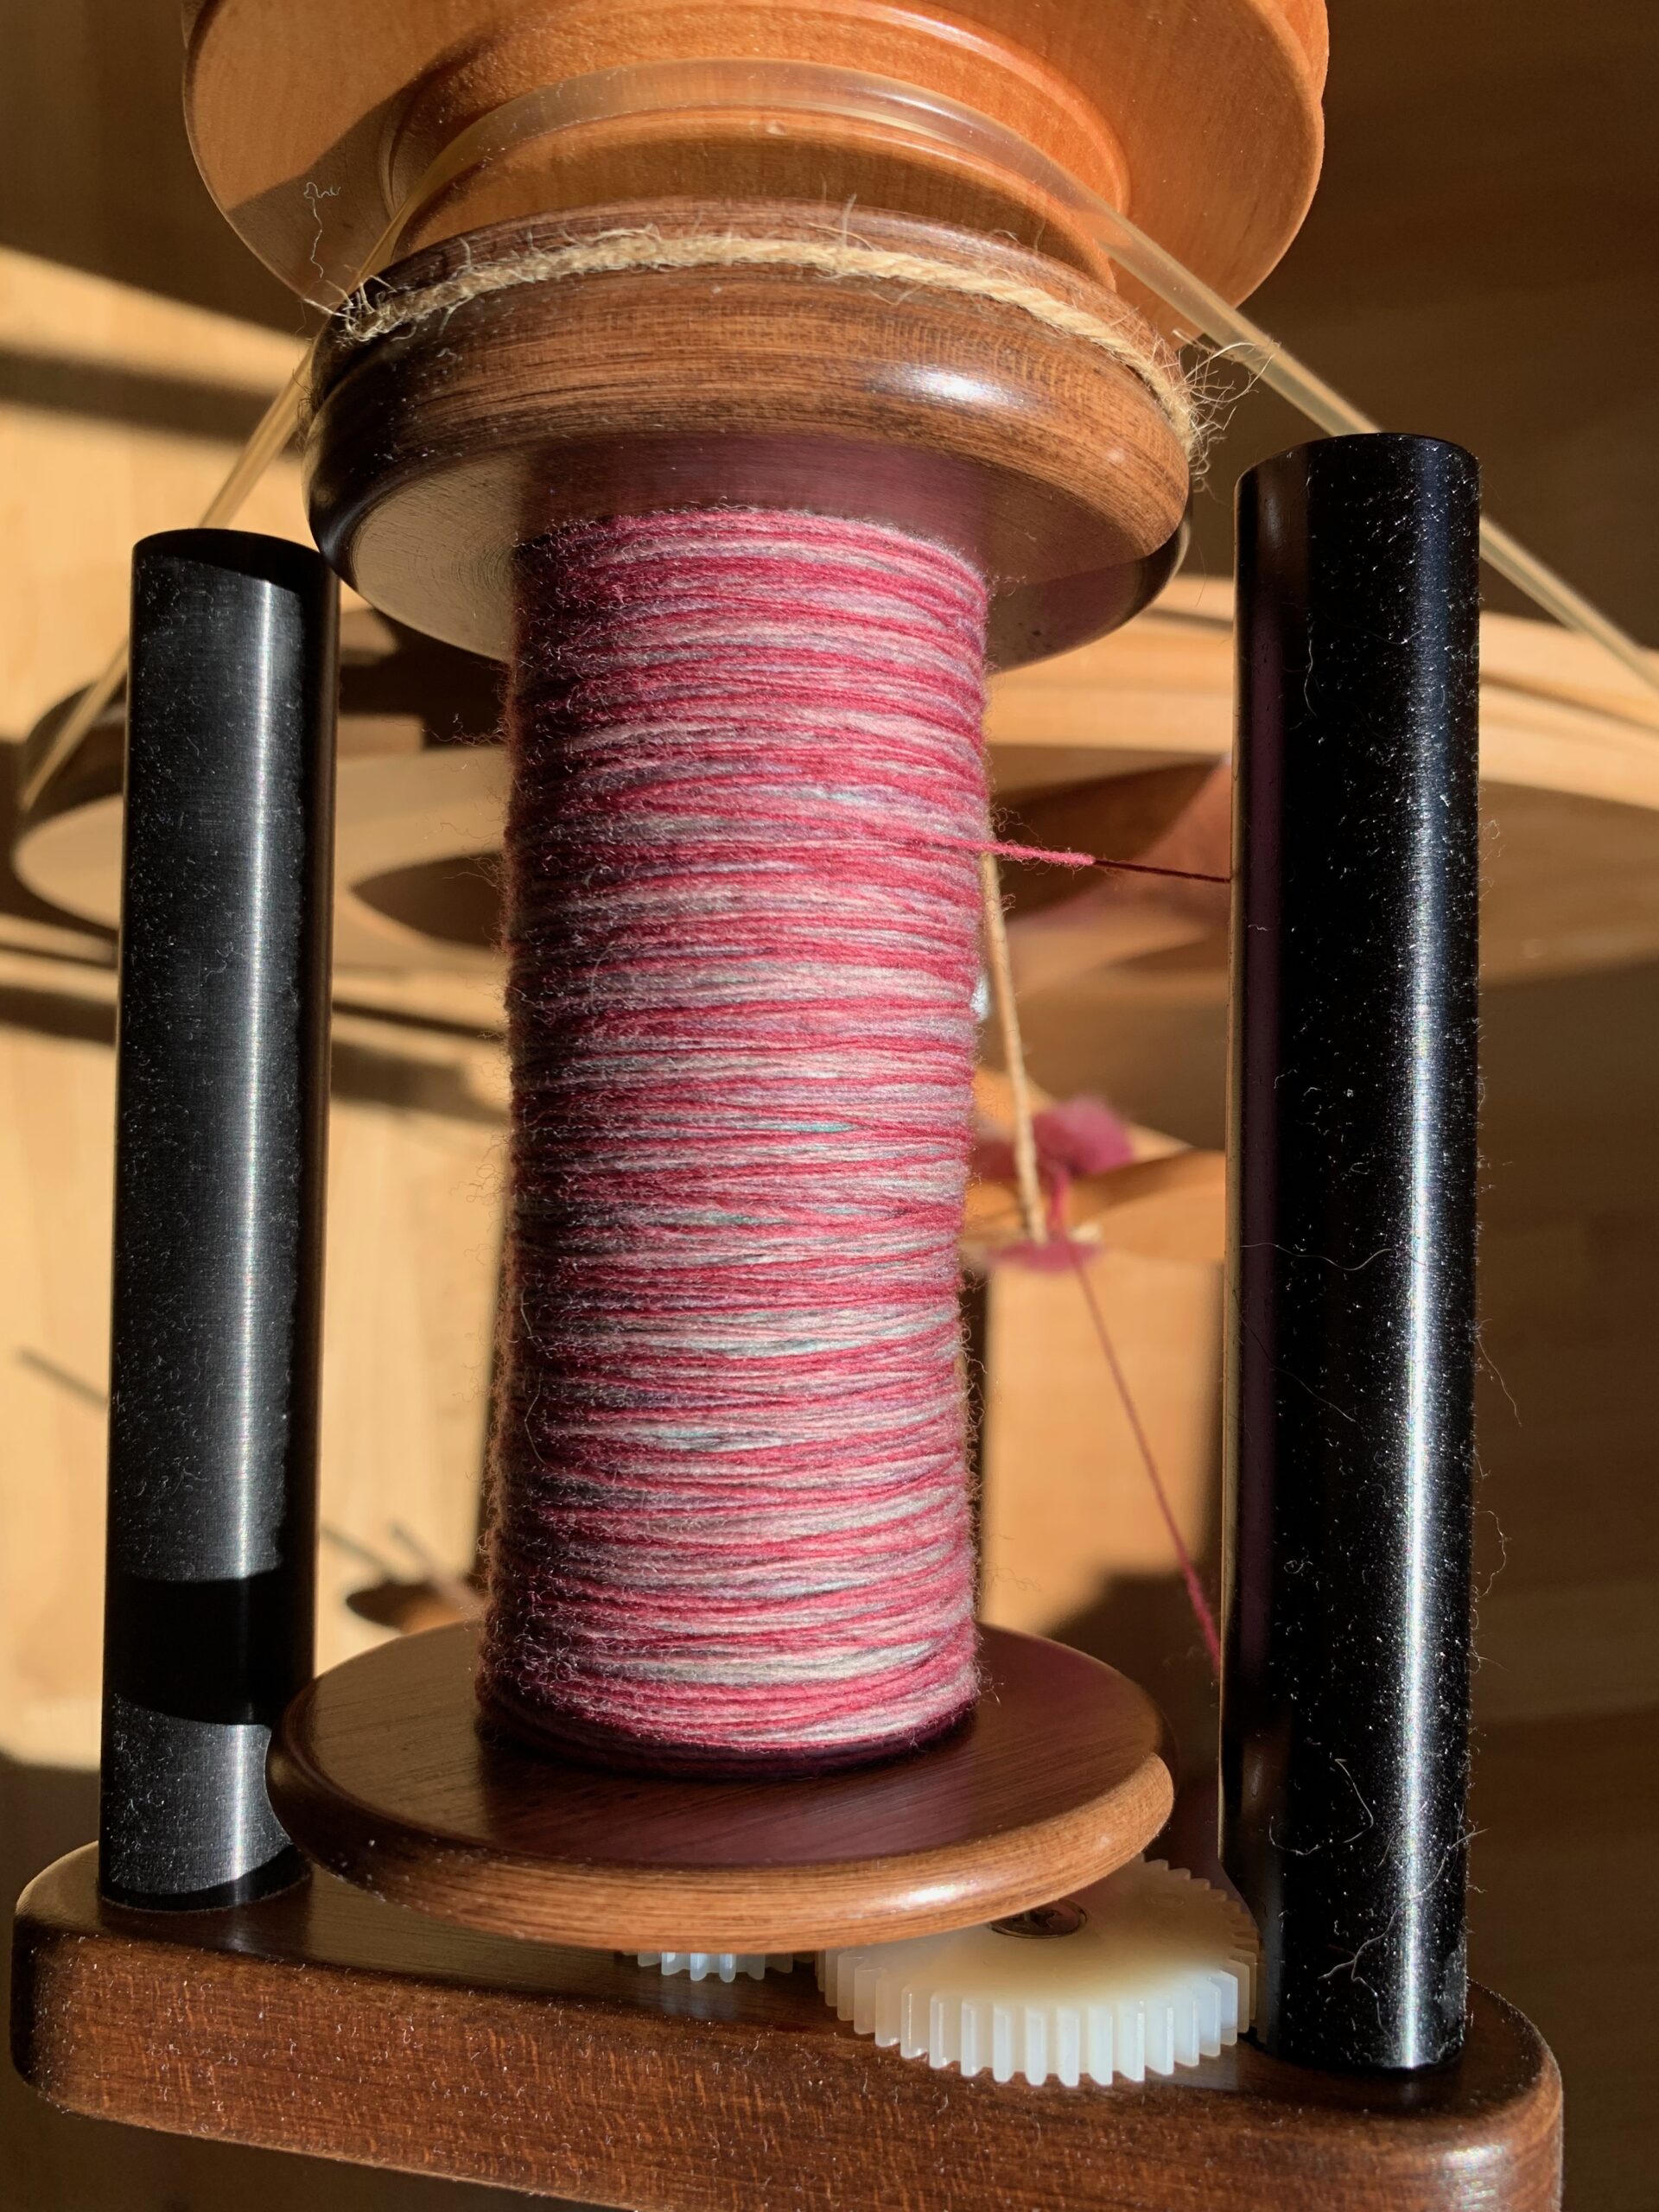 My Favorite Resources for Learning How to Spin Yarn - Liza Olmsted